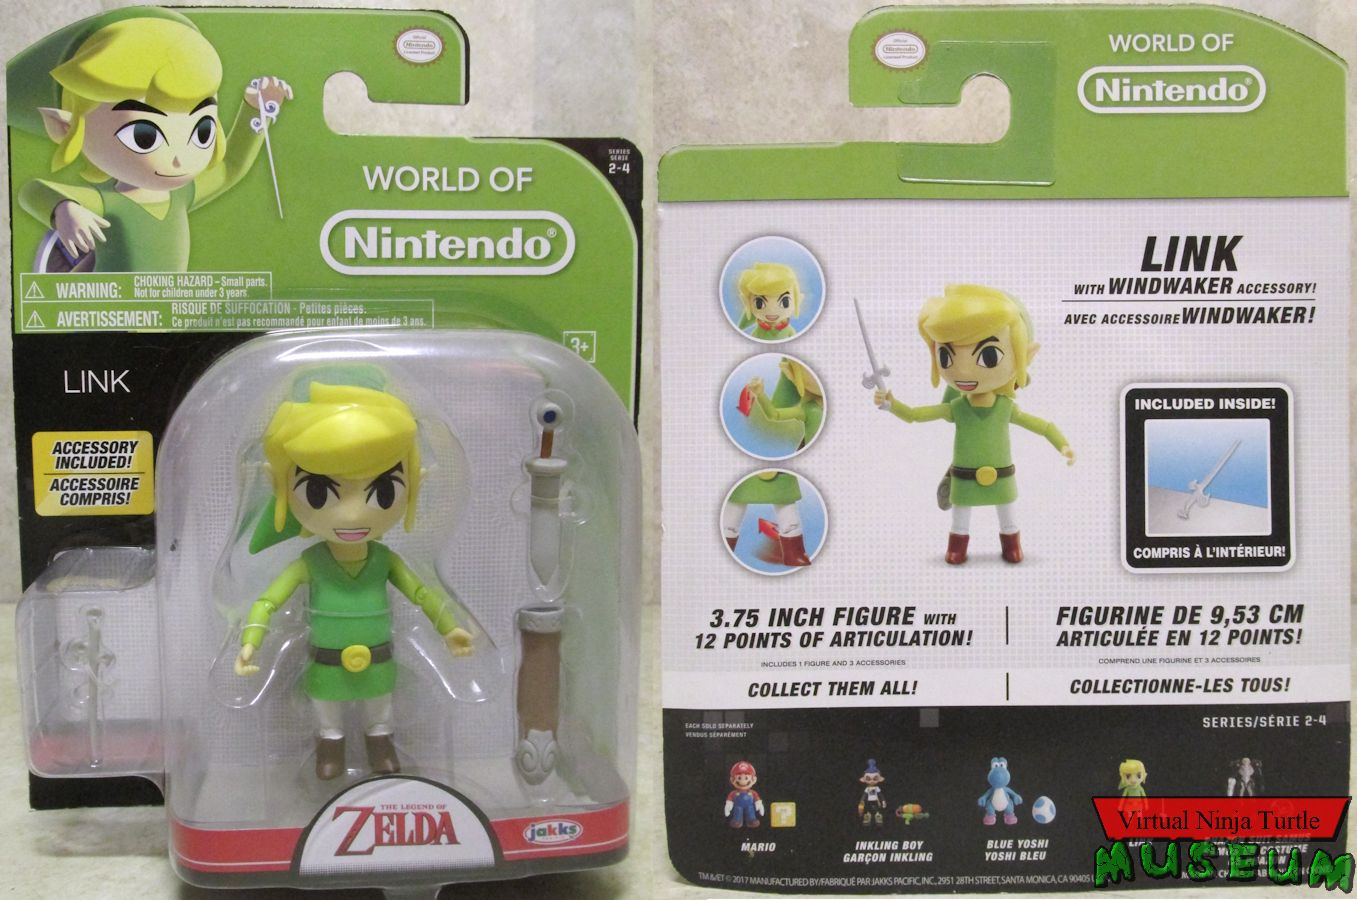 Toon Link packaging front and back